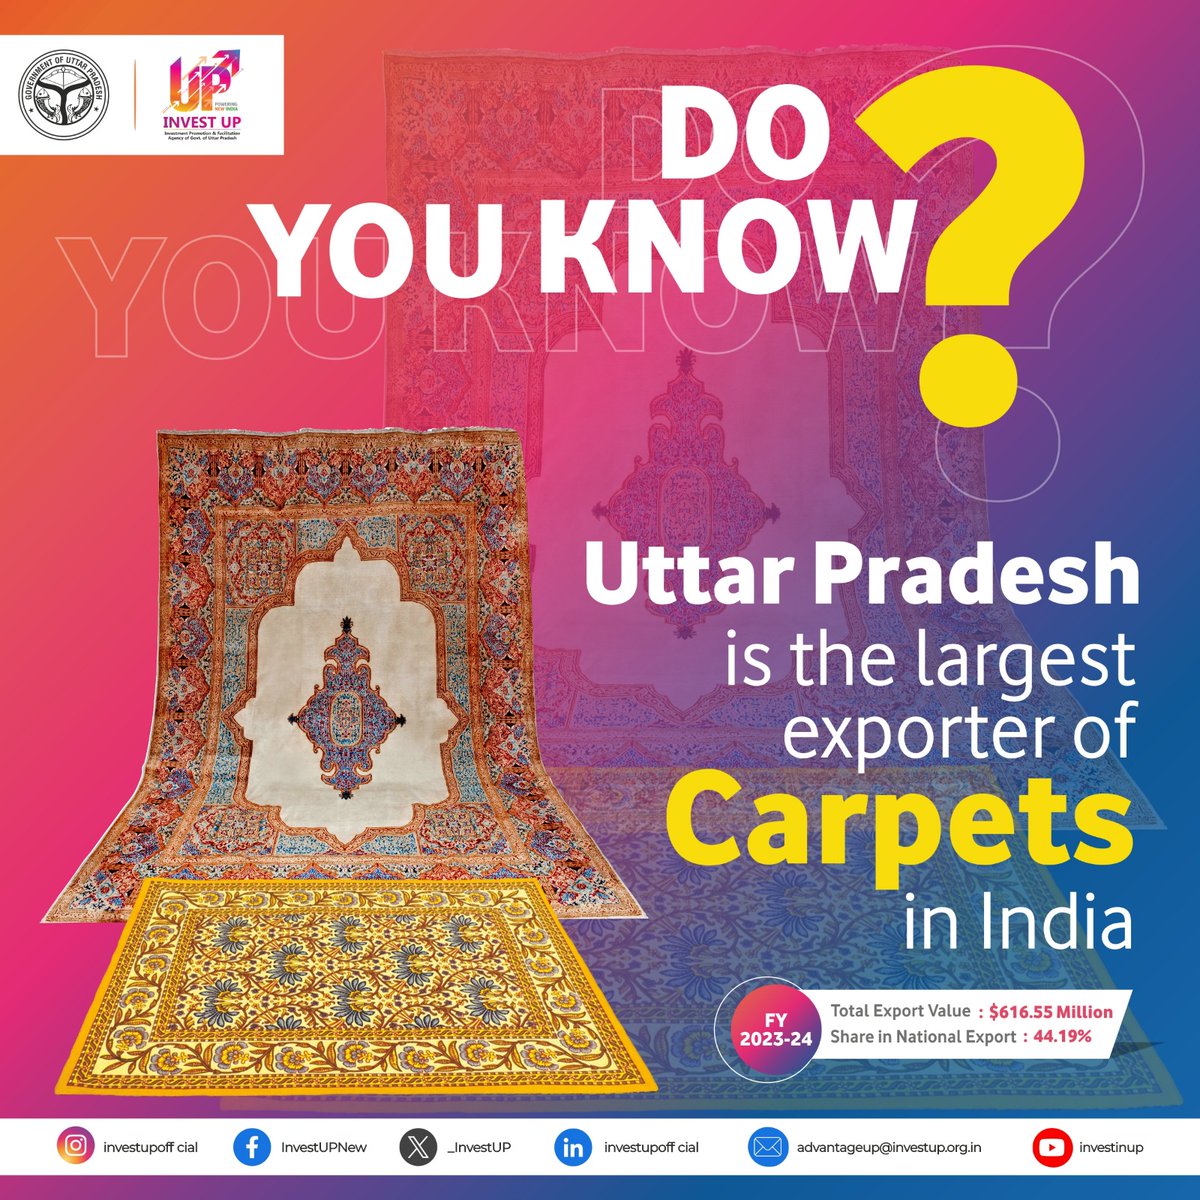 #DoYouKnow?
With 44.19% share in India’s overall export and $616.55 Million of export value in FY 2023-24, #UttarPradesh is the largest carpet exporter state of the country.

msme.gov.in
odopup.in
bit.ly/3Qn2J6w
invest.up.gov.in…